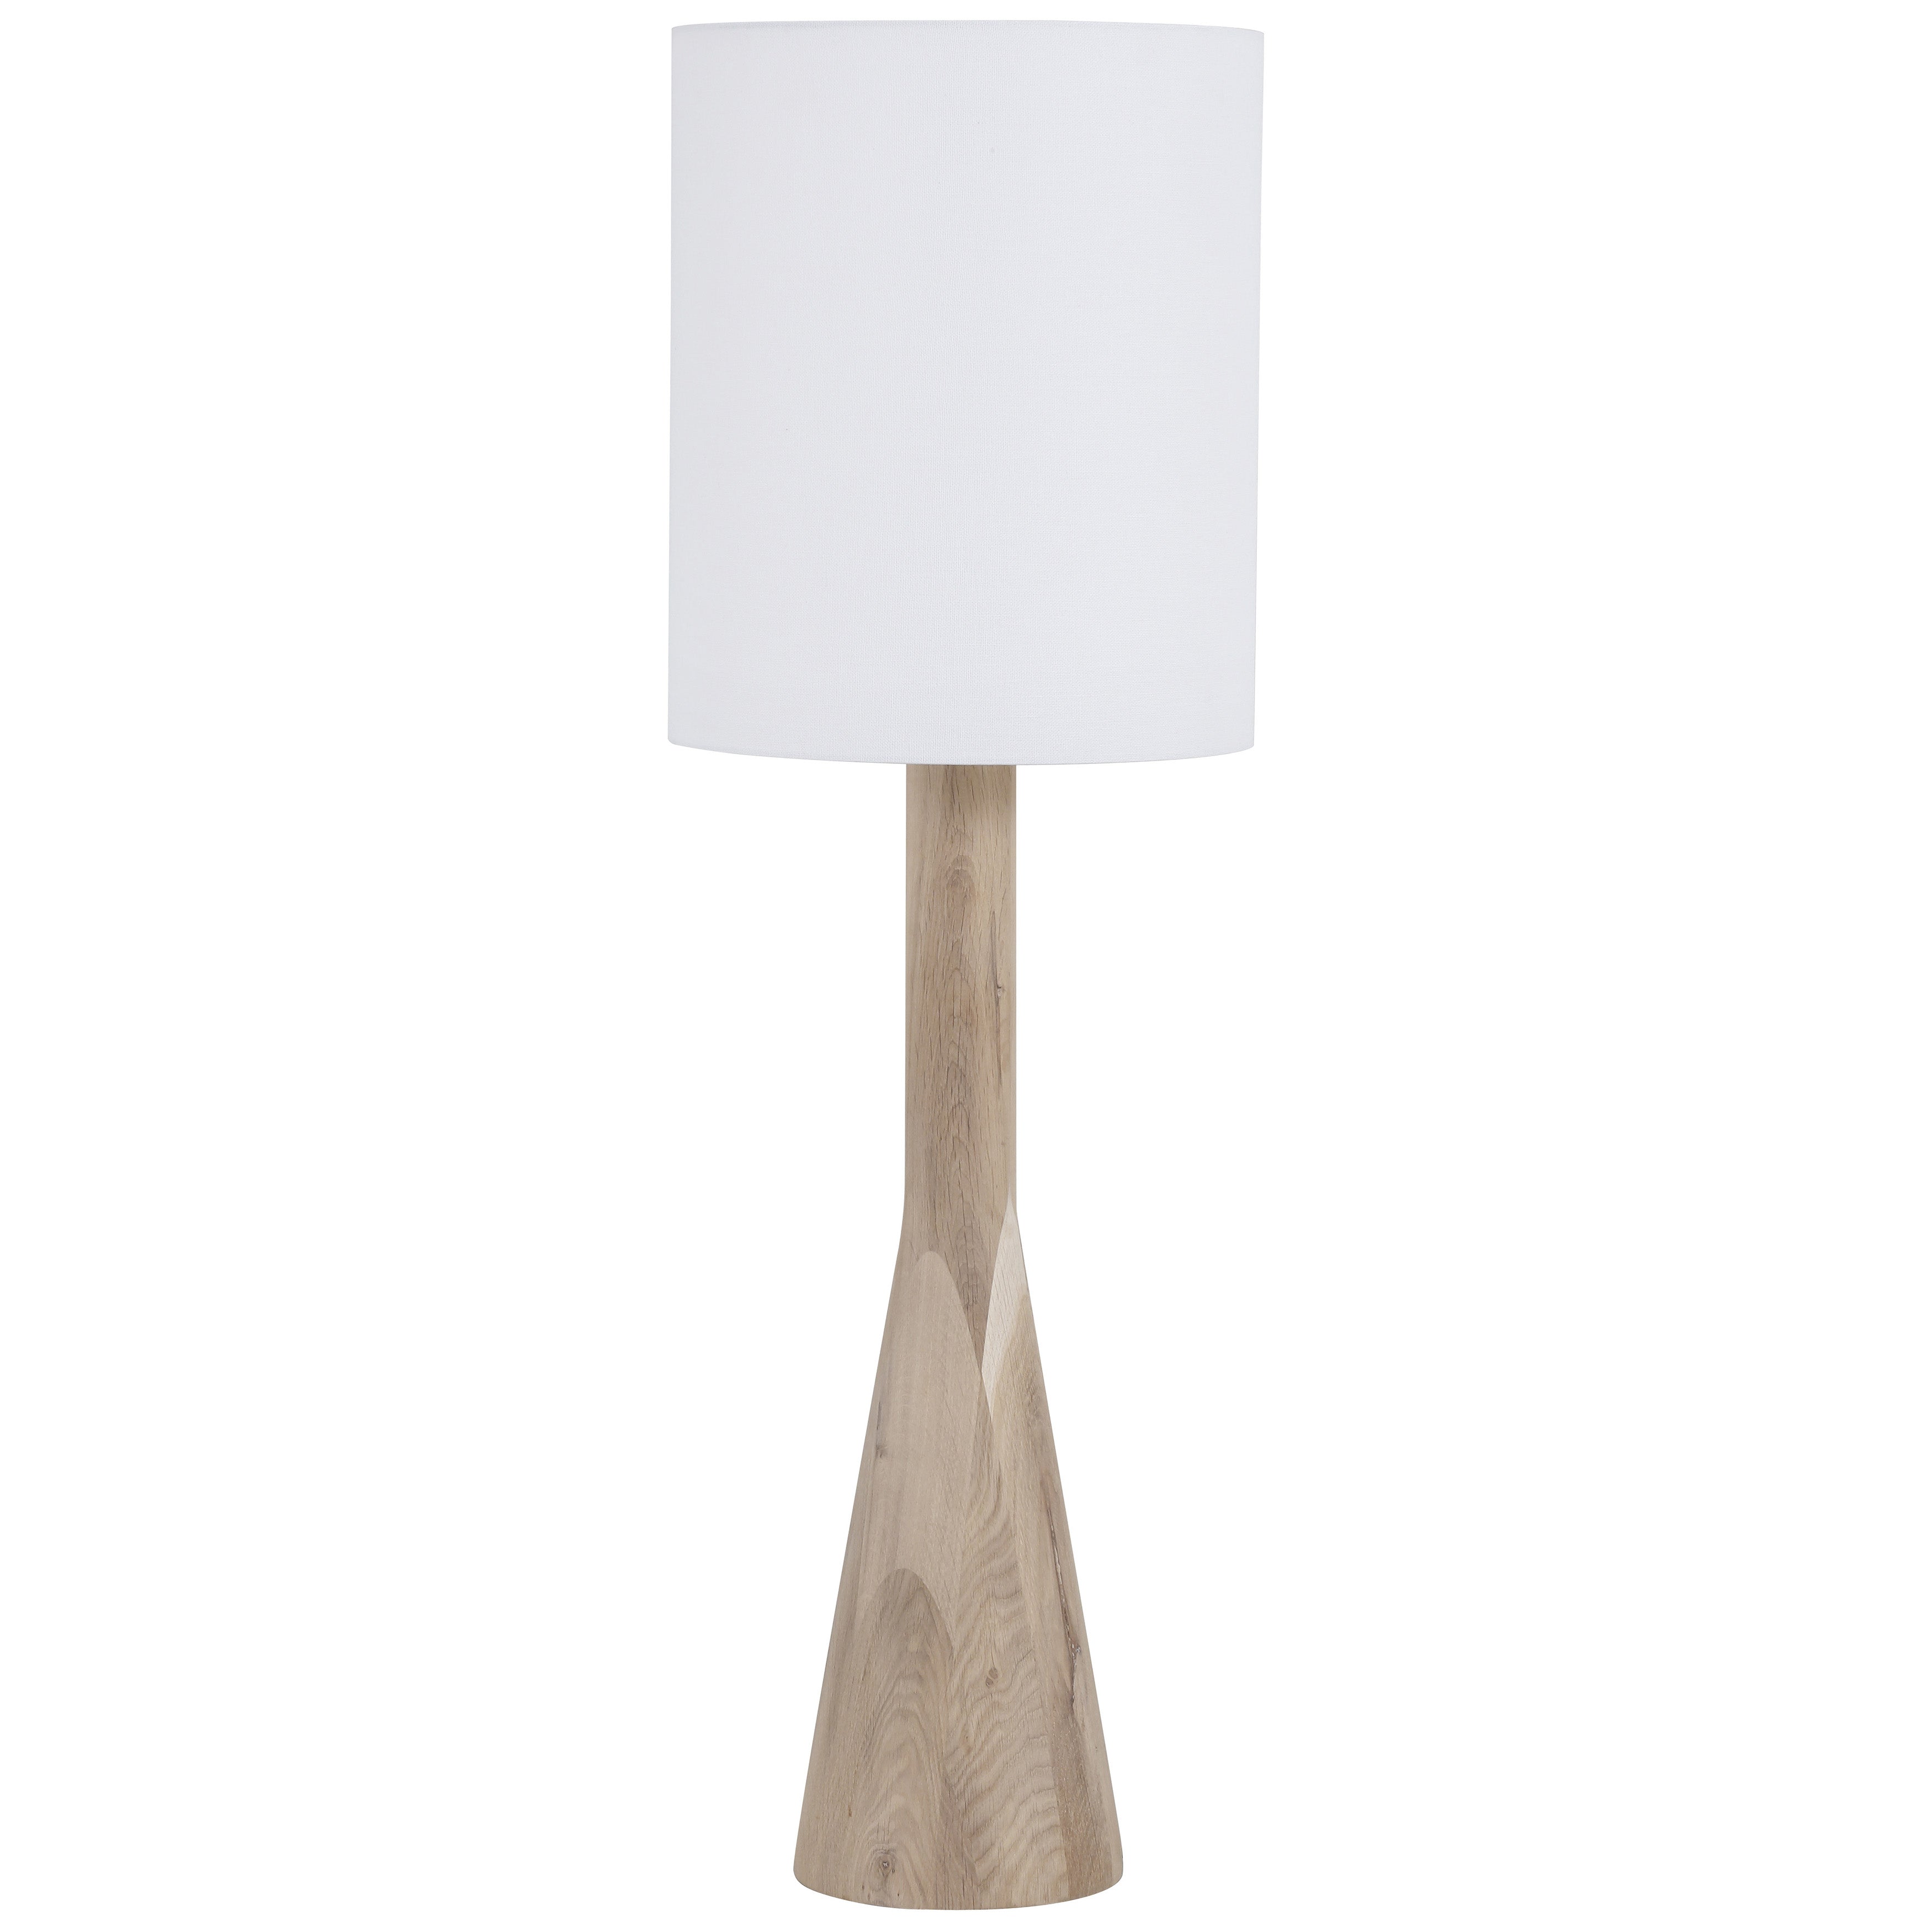 Adan Table Lamp - What A Room